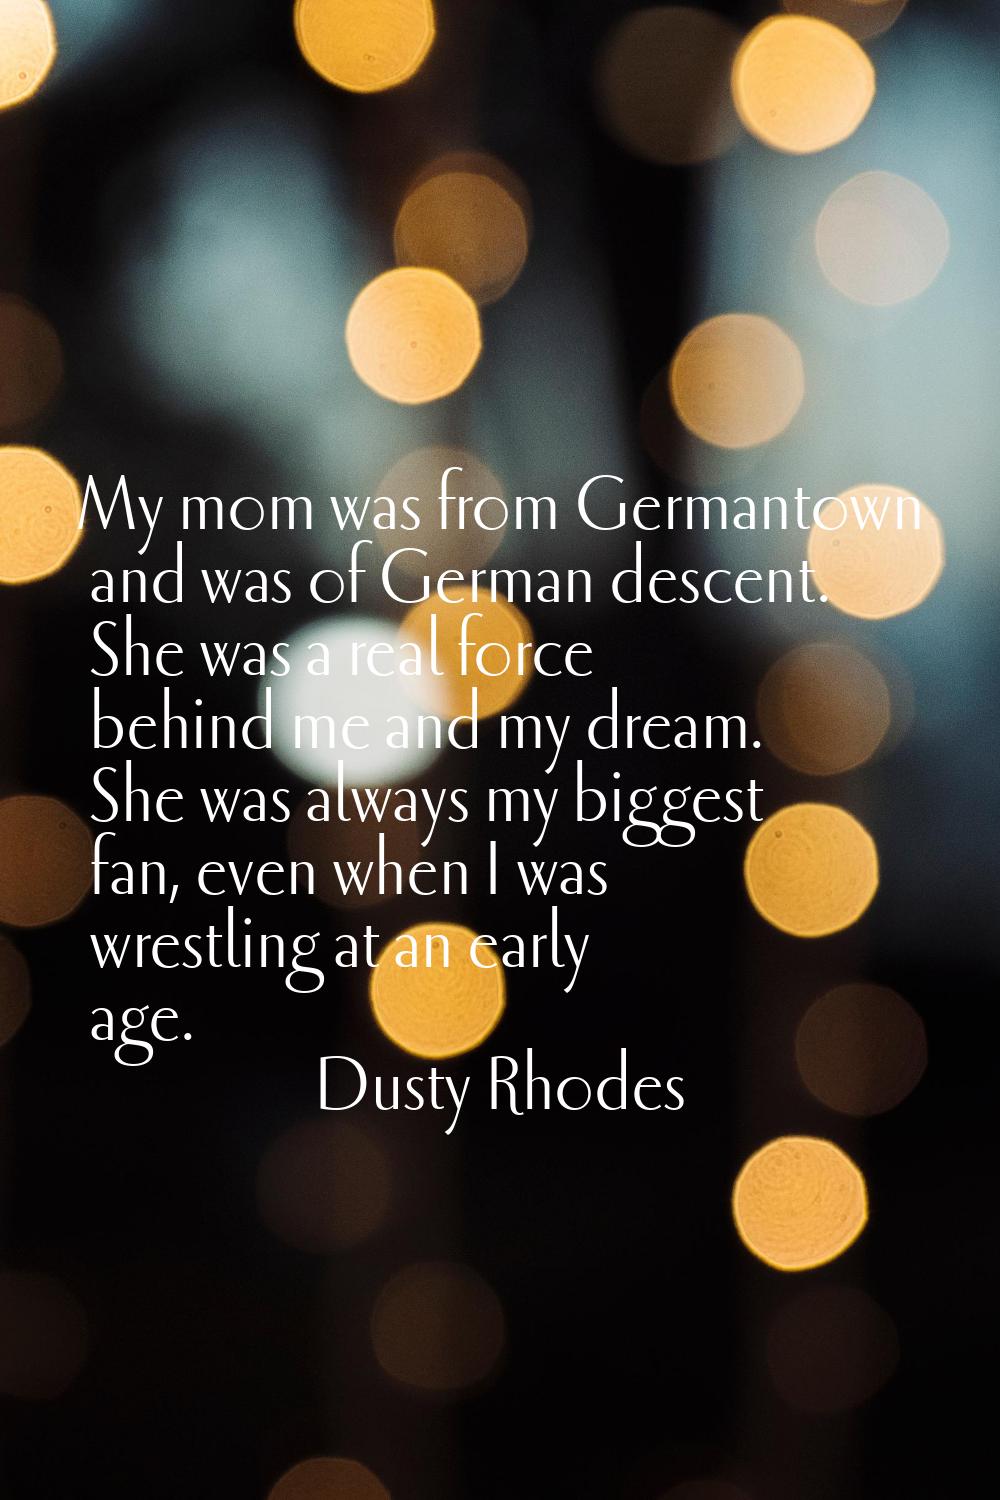 My mom was from Germantown and was of German descent. She was a real force behind me and my dream. 